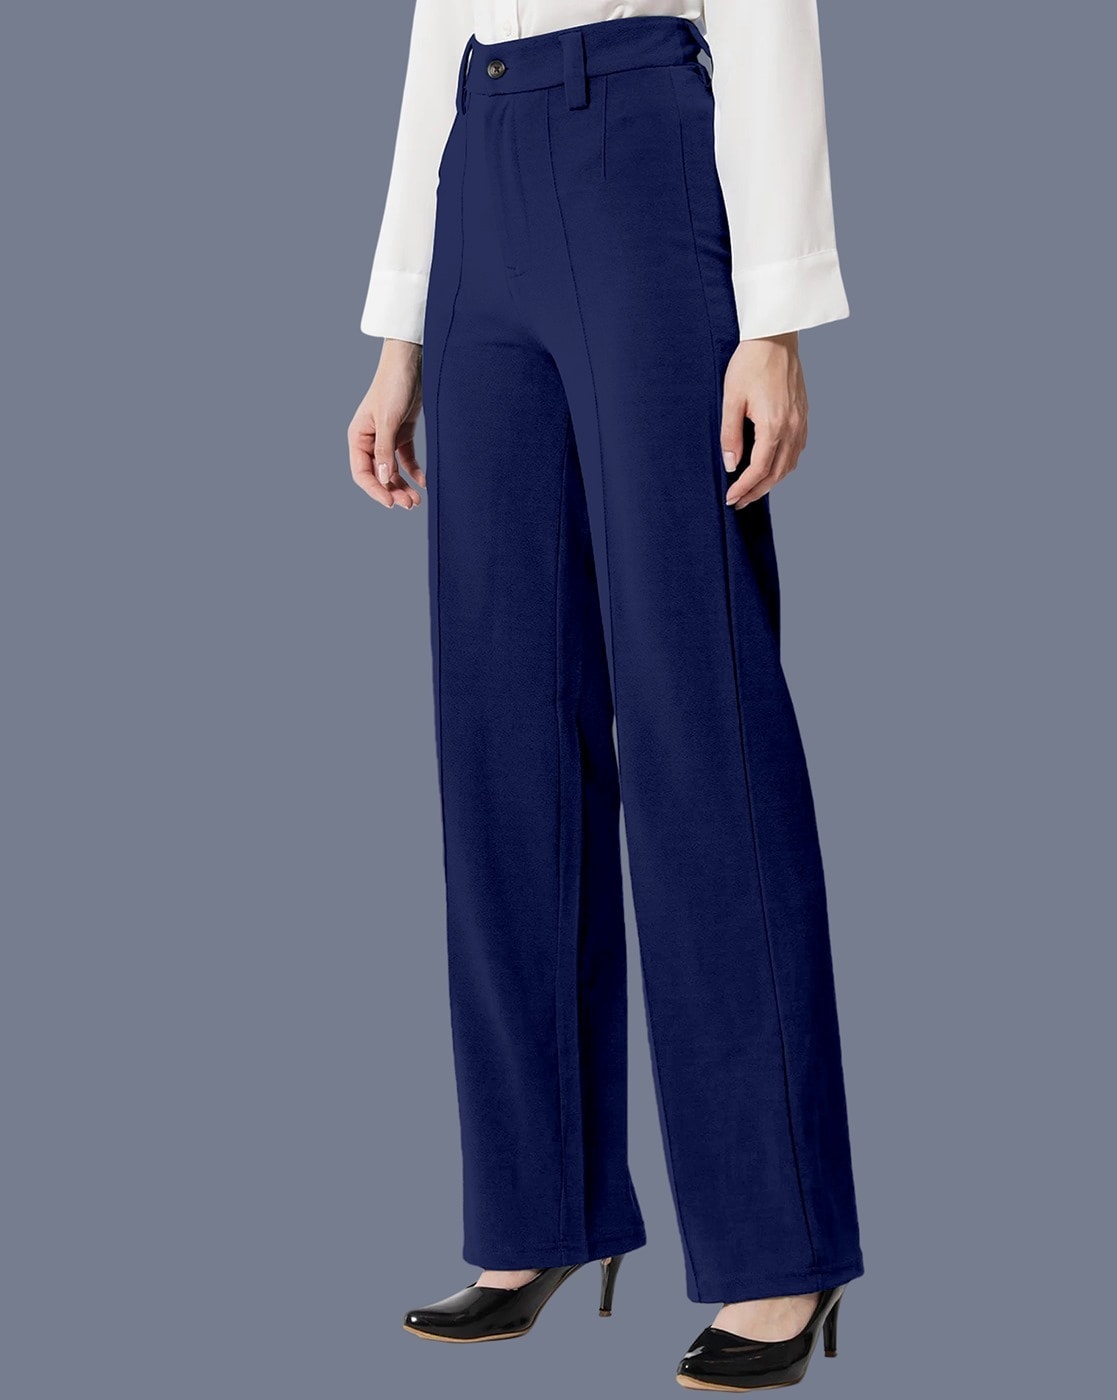 Wide jersey trousers - Navy blue/Pinstriped - Ladies | H&M